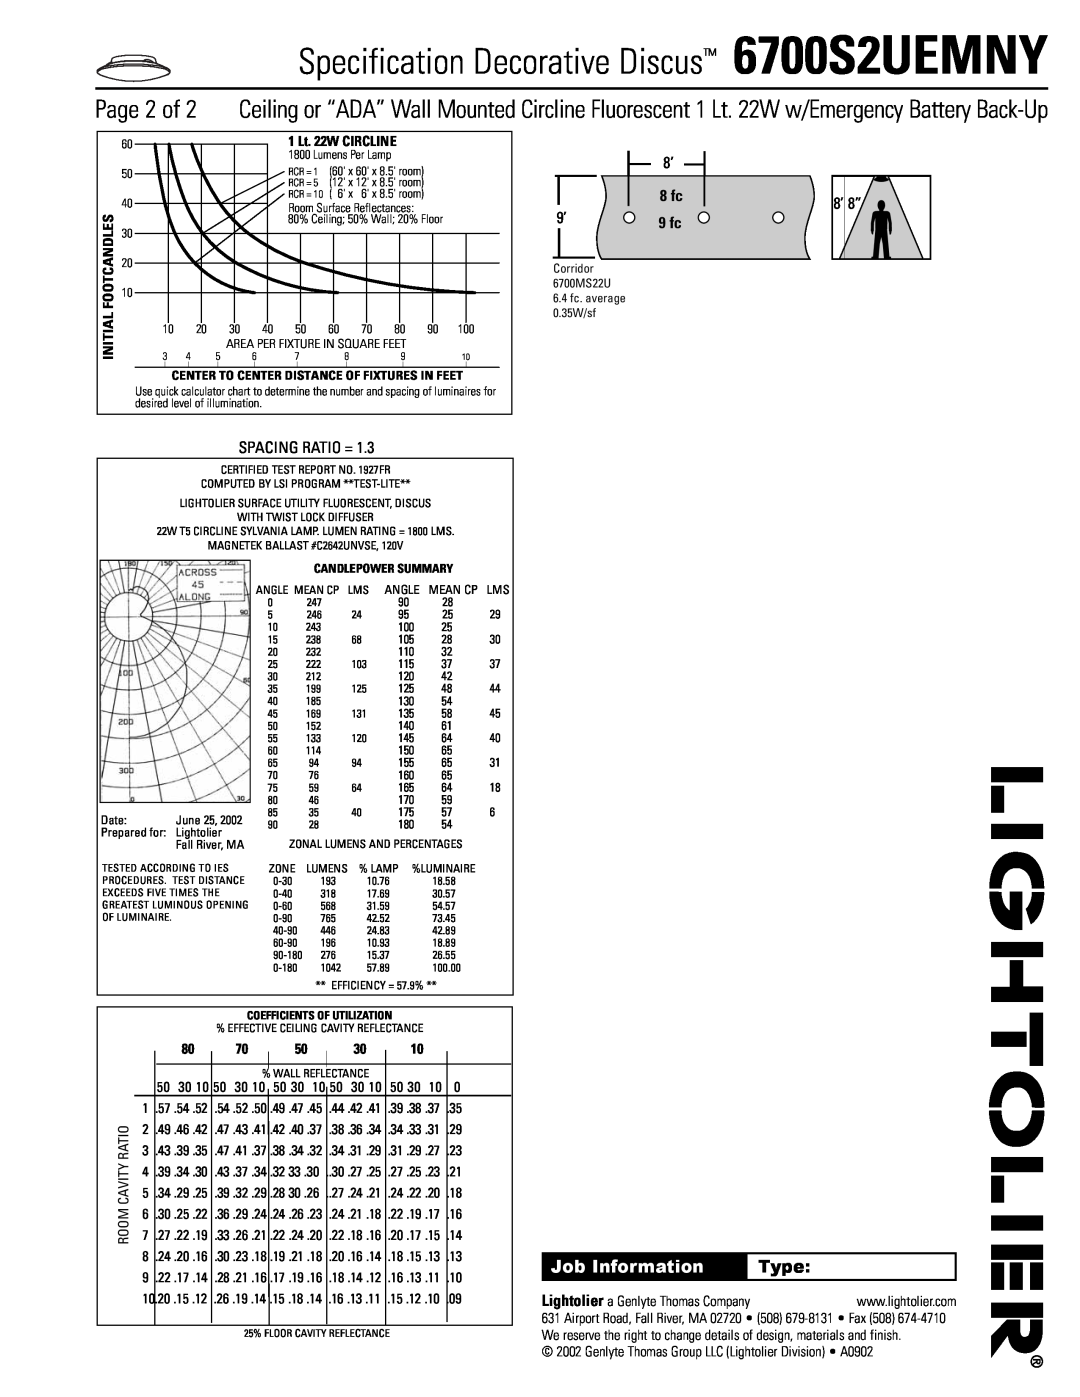 Lightolier manual Specification Decorative Discus 6700S2UEMNY, Job Information, Type, Initial Footcandles, 8 fc 